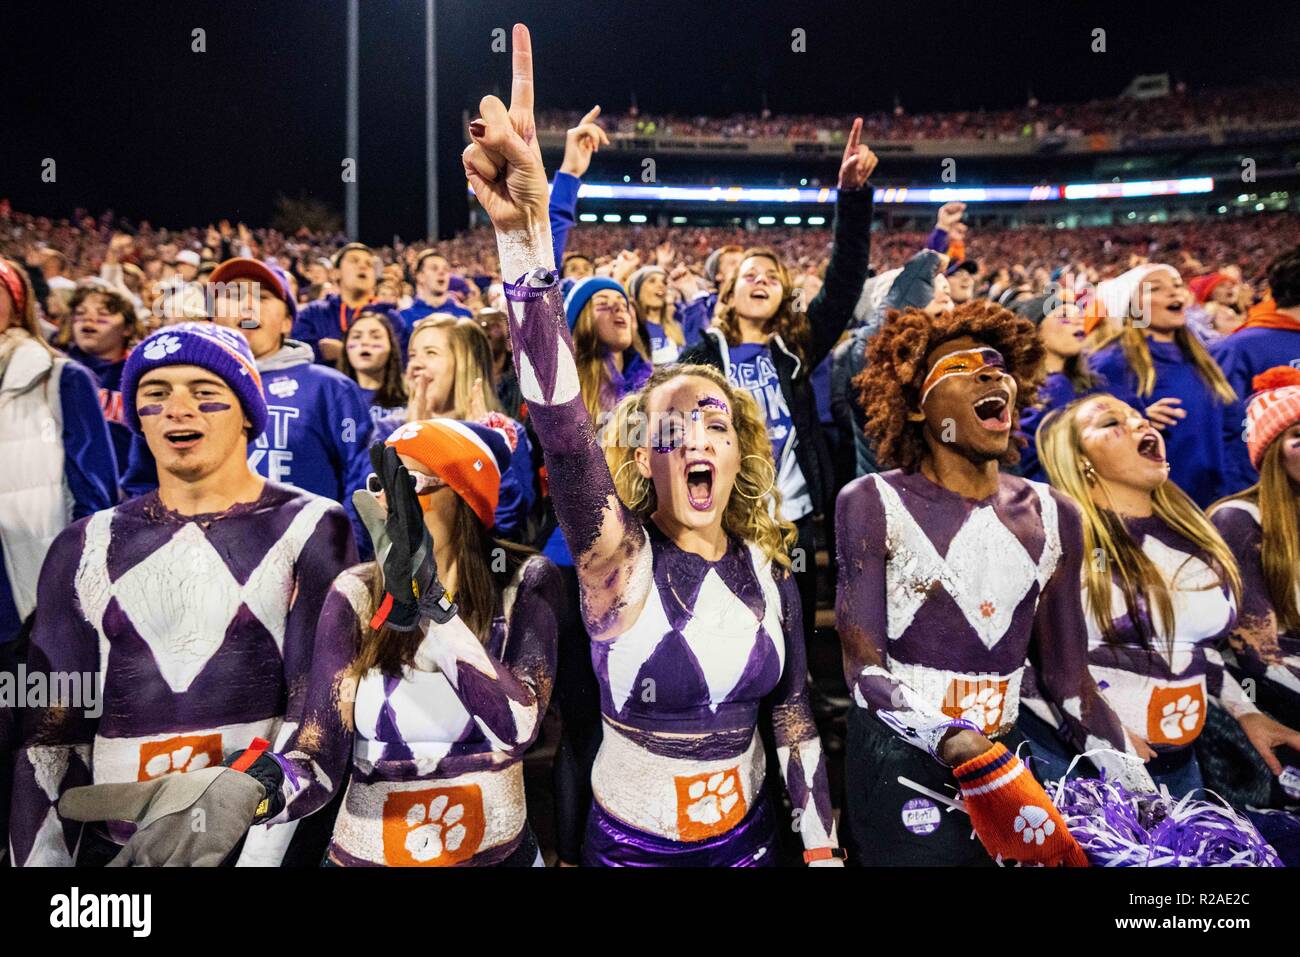 Clemson student fans during the NCAA college football game between Duke and Clemson on Saturday November 17, 2018 at Memorial Stadium in Clemson, SC. Jacob Kupferman/CSM Stock Photo